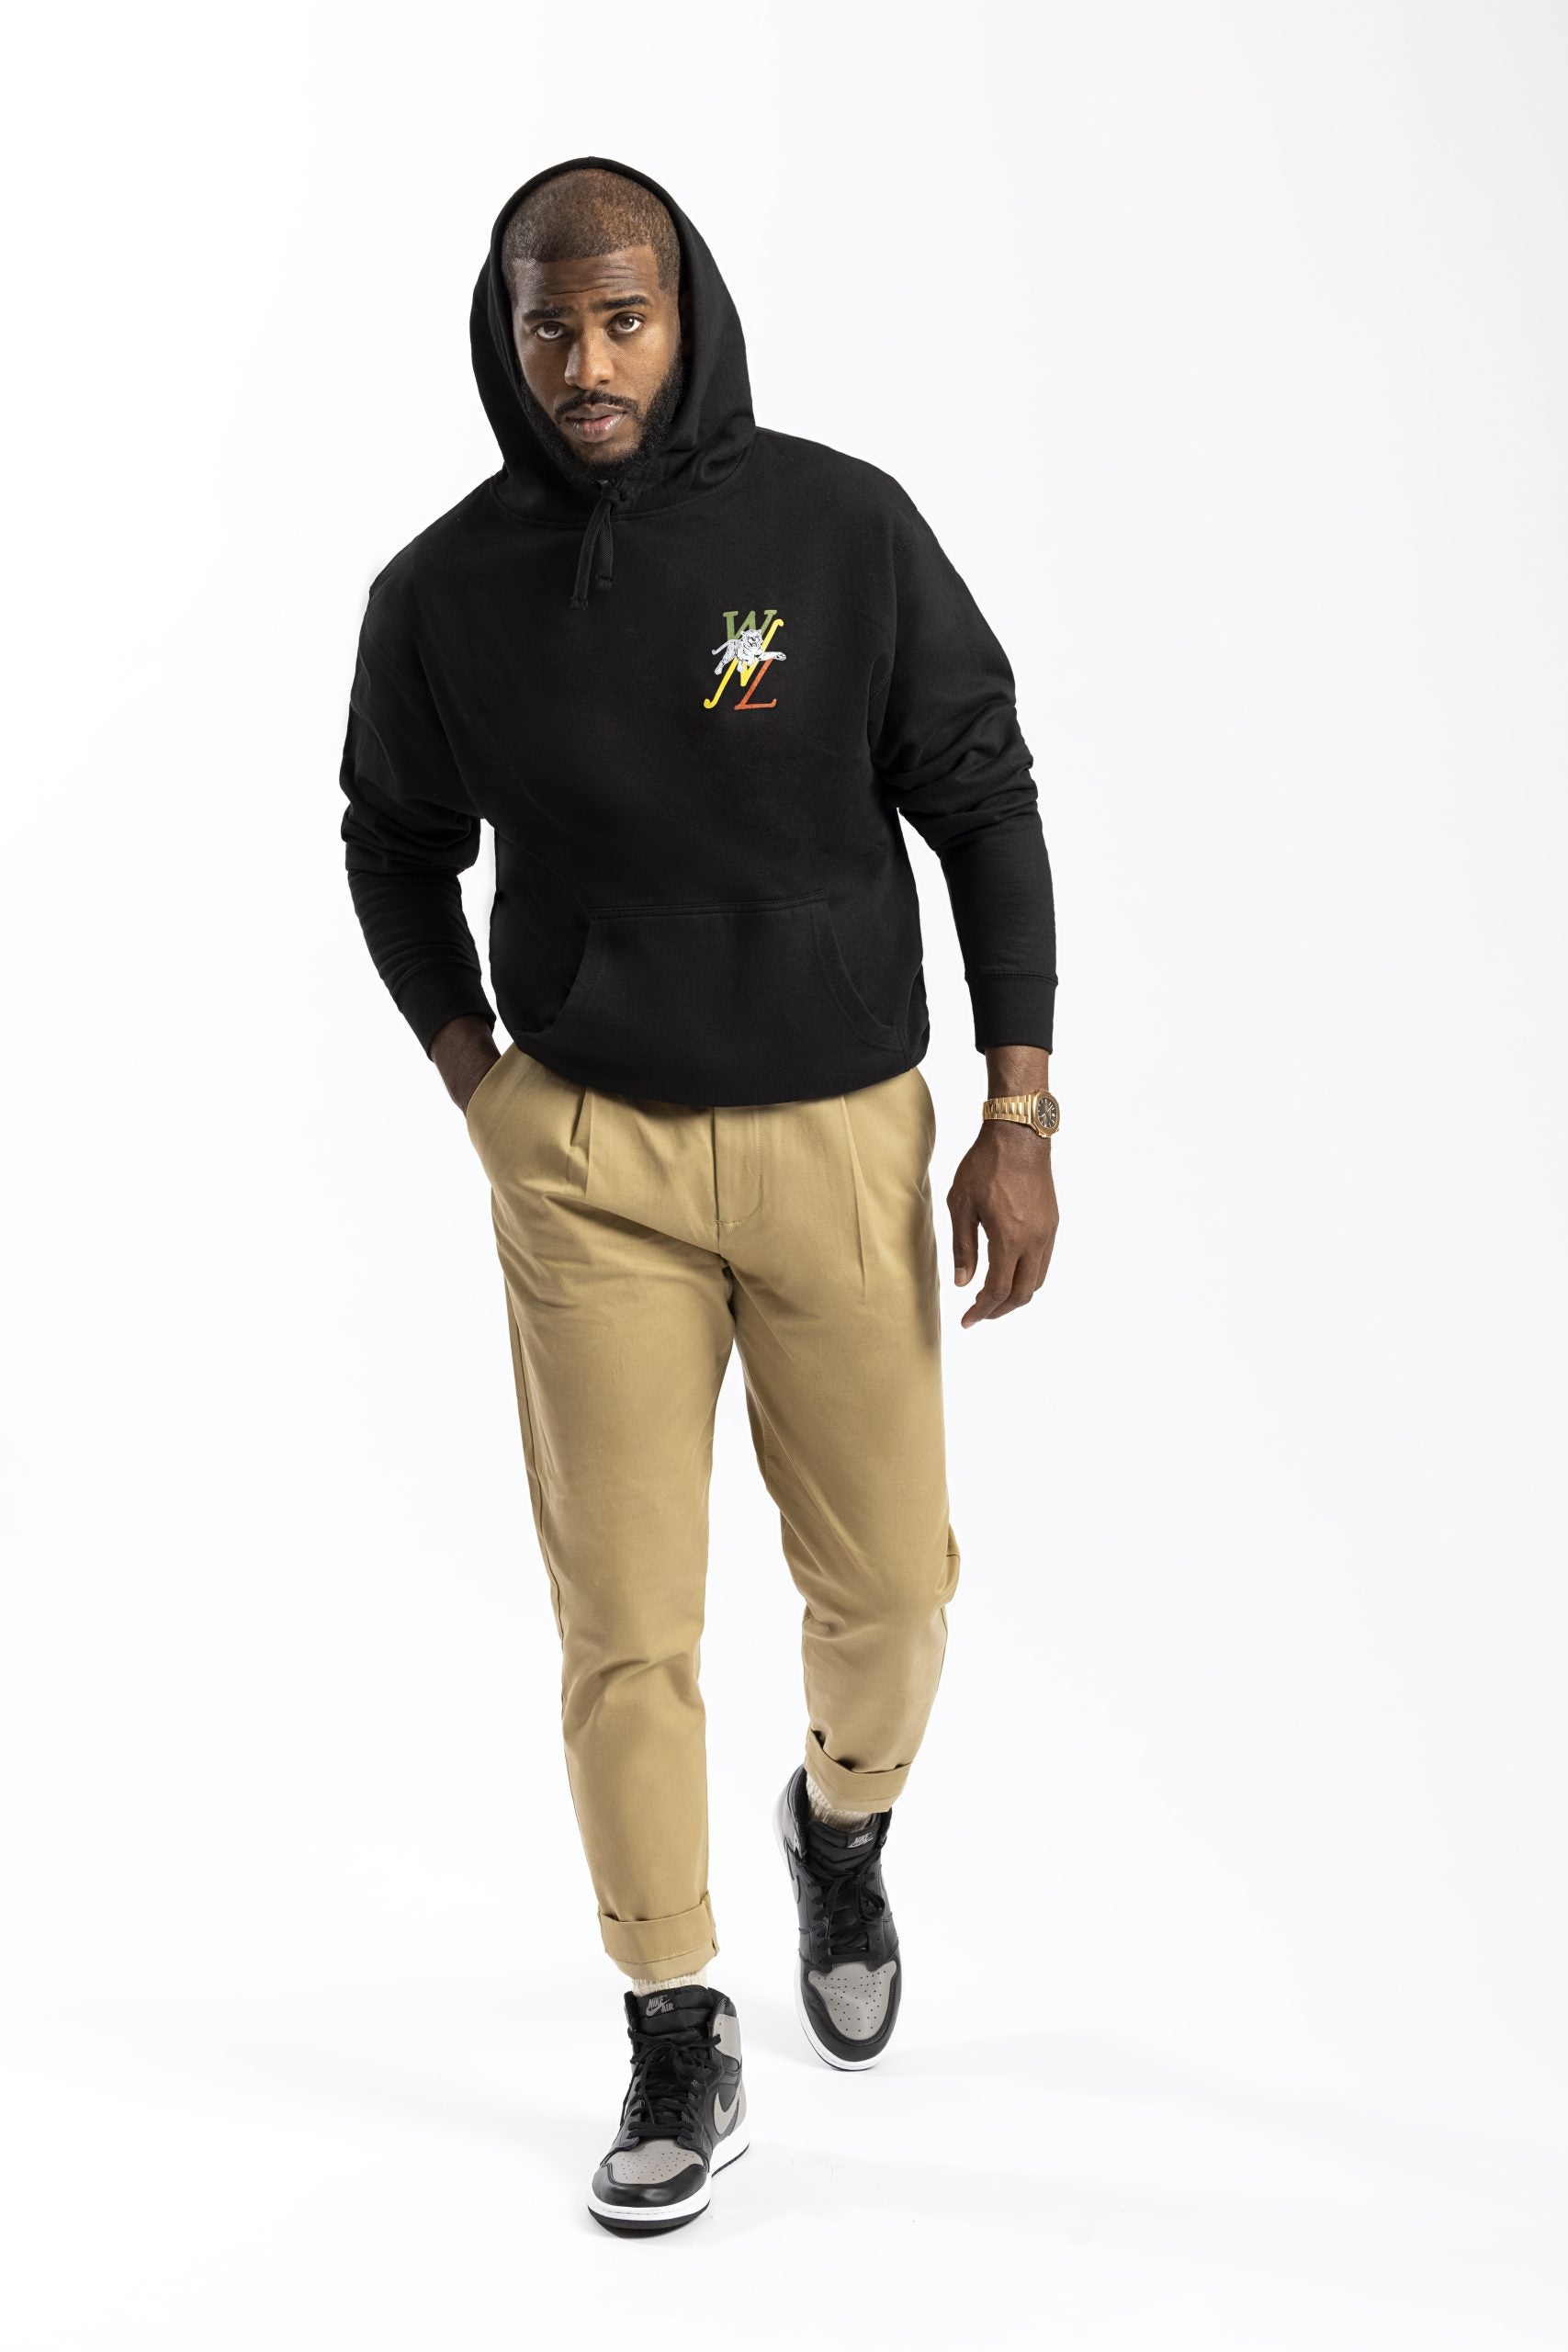 Exclusive: Chris Paul's Social Change Fund And Bleacher Report Partner On Capsule Collection Supporting HBCUs